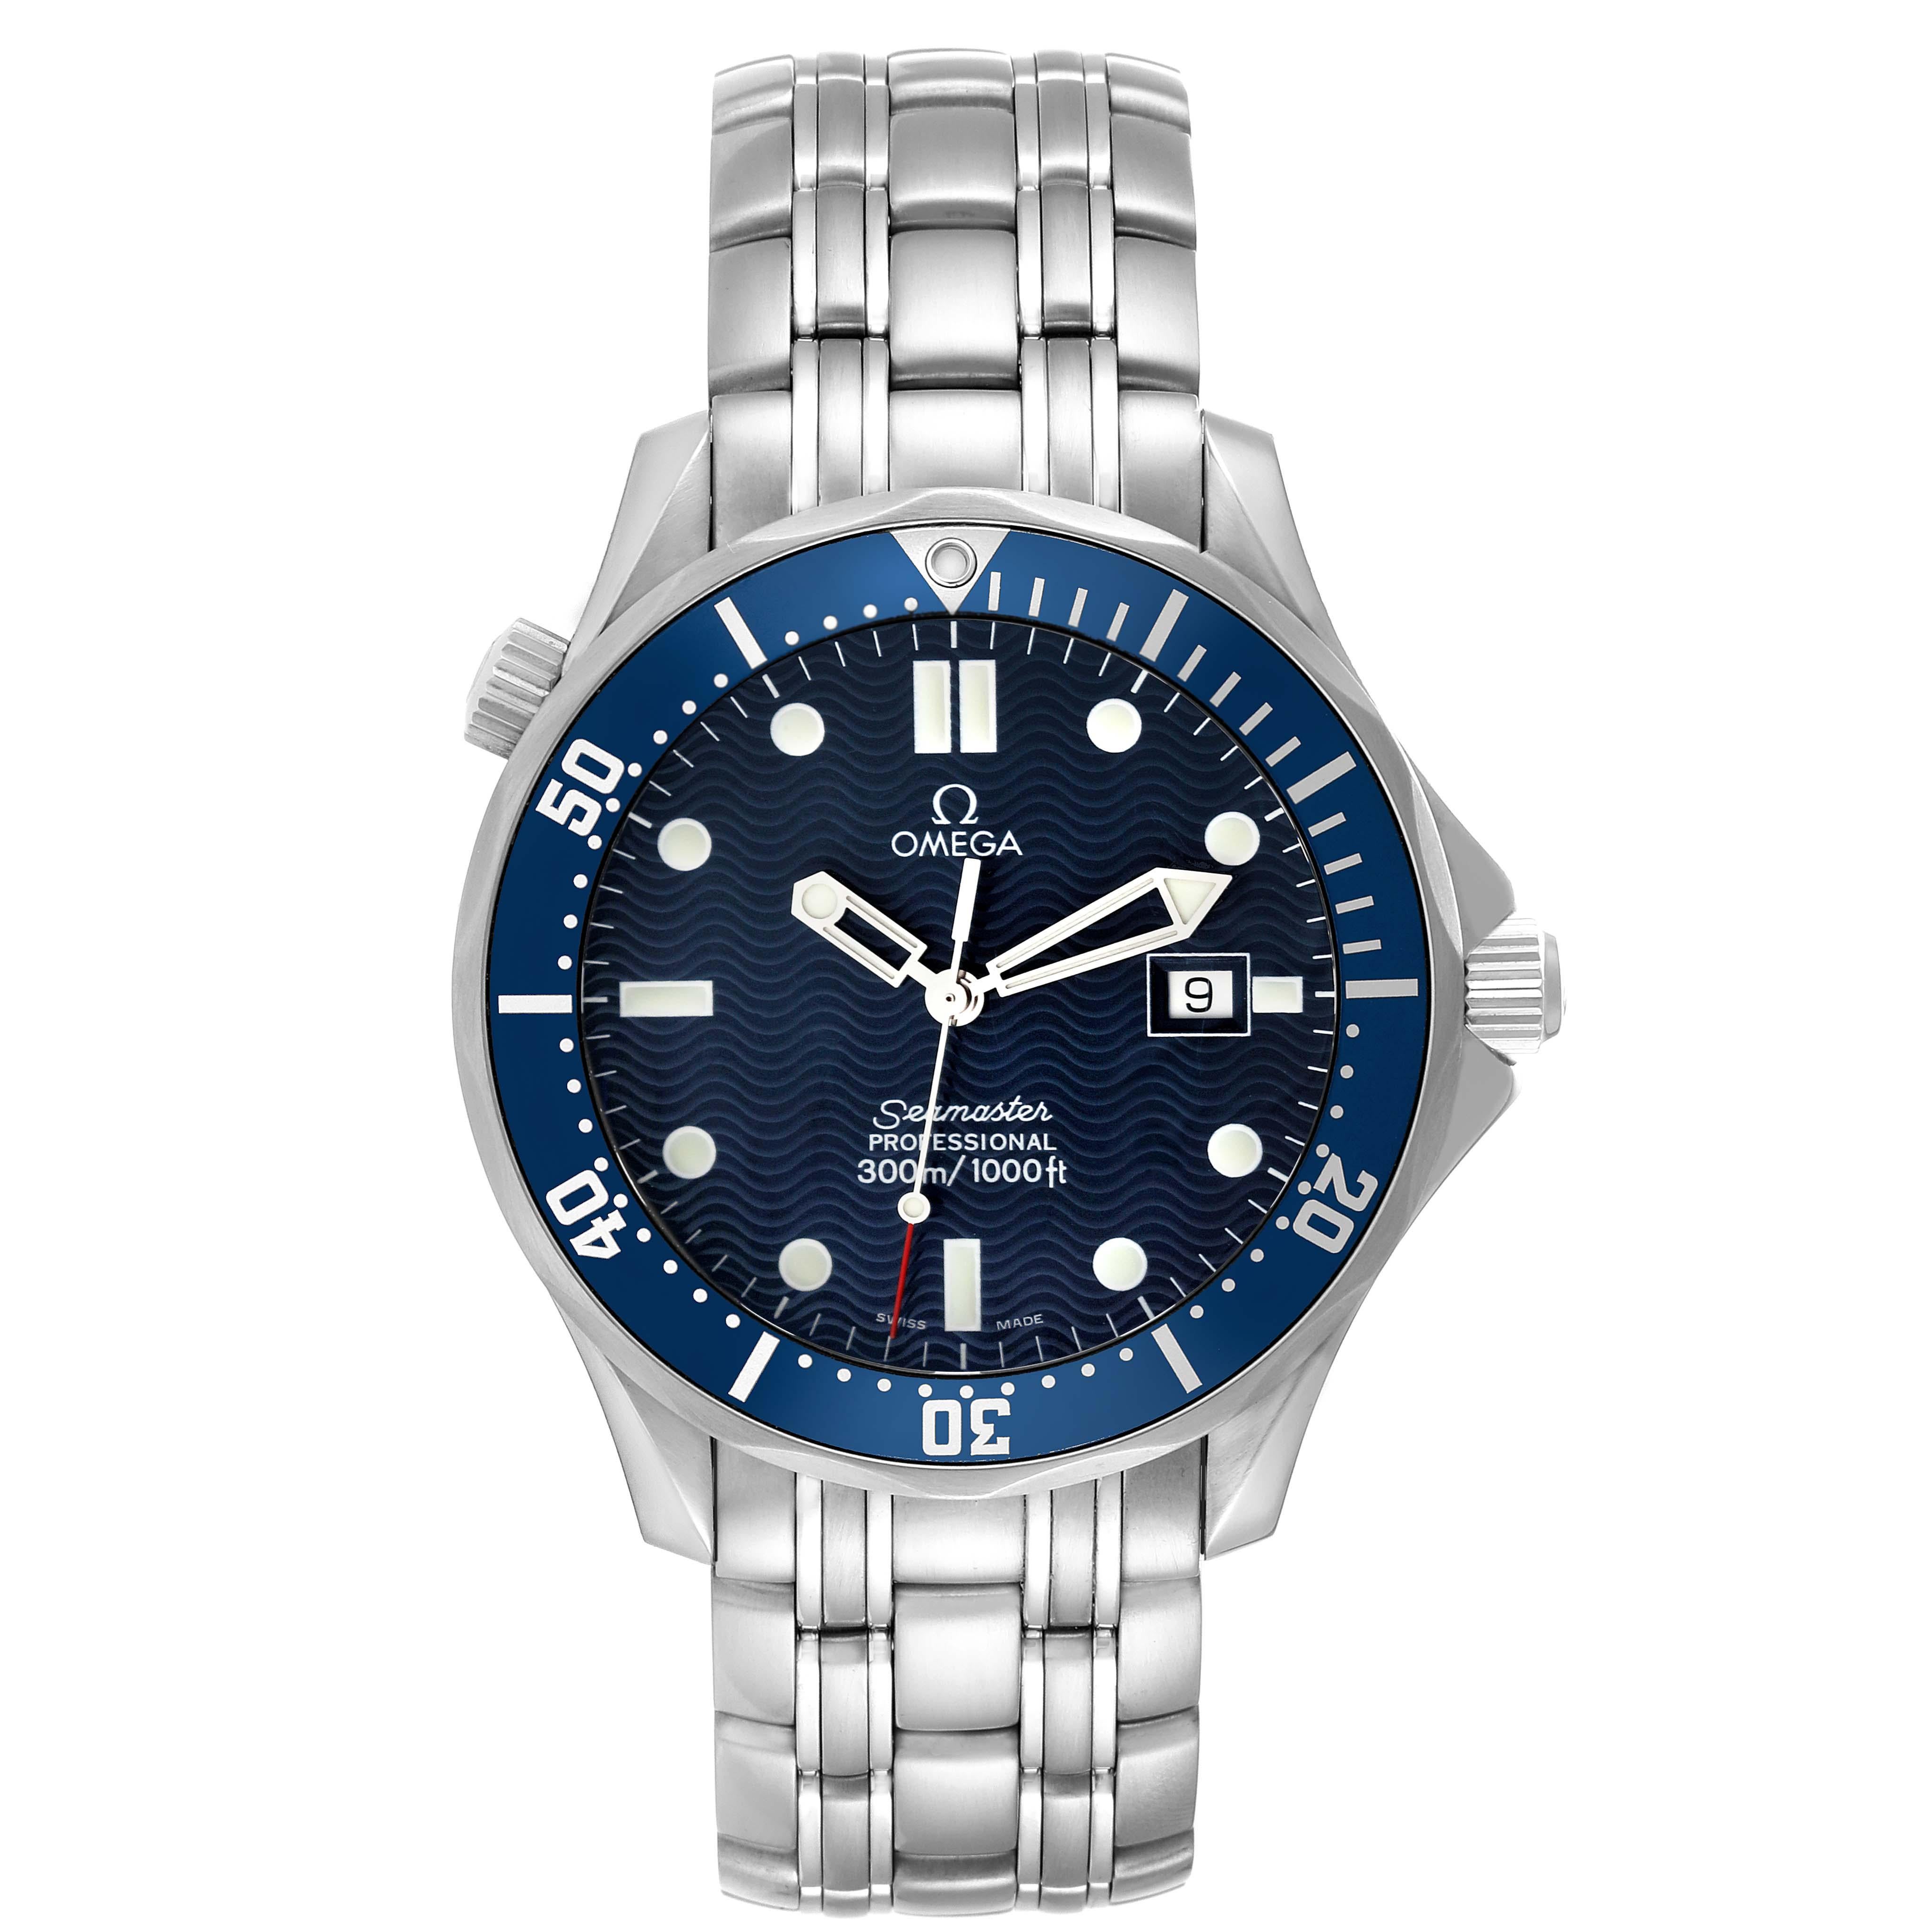 Omega Seamaster Diver James Bond Steel Mens Watch 2541.80.00 Box Papers. Quartz movement, Caliber 1538. Stainless steel case 41 mm in diameter. Omega logo on the crown. Helium escape valve at 10 o'clock. Blue unidirectional rotating bezel. Scratch